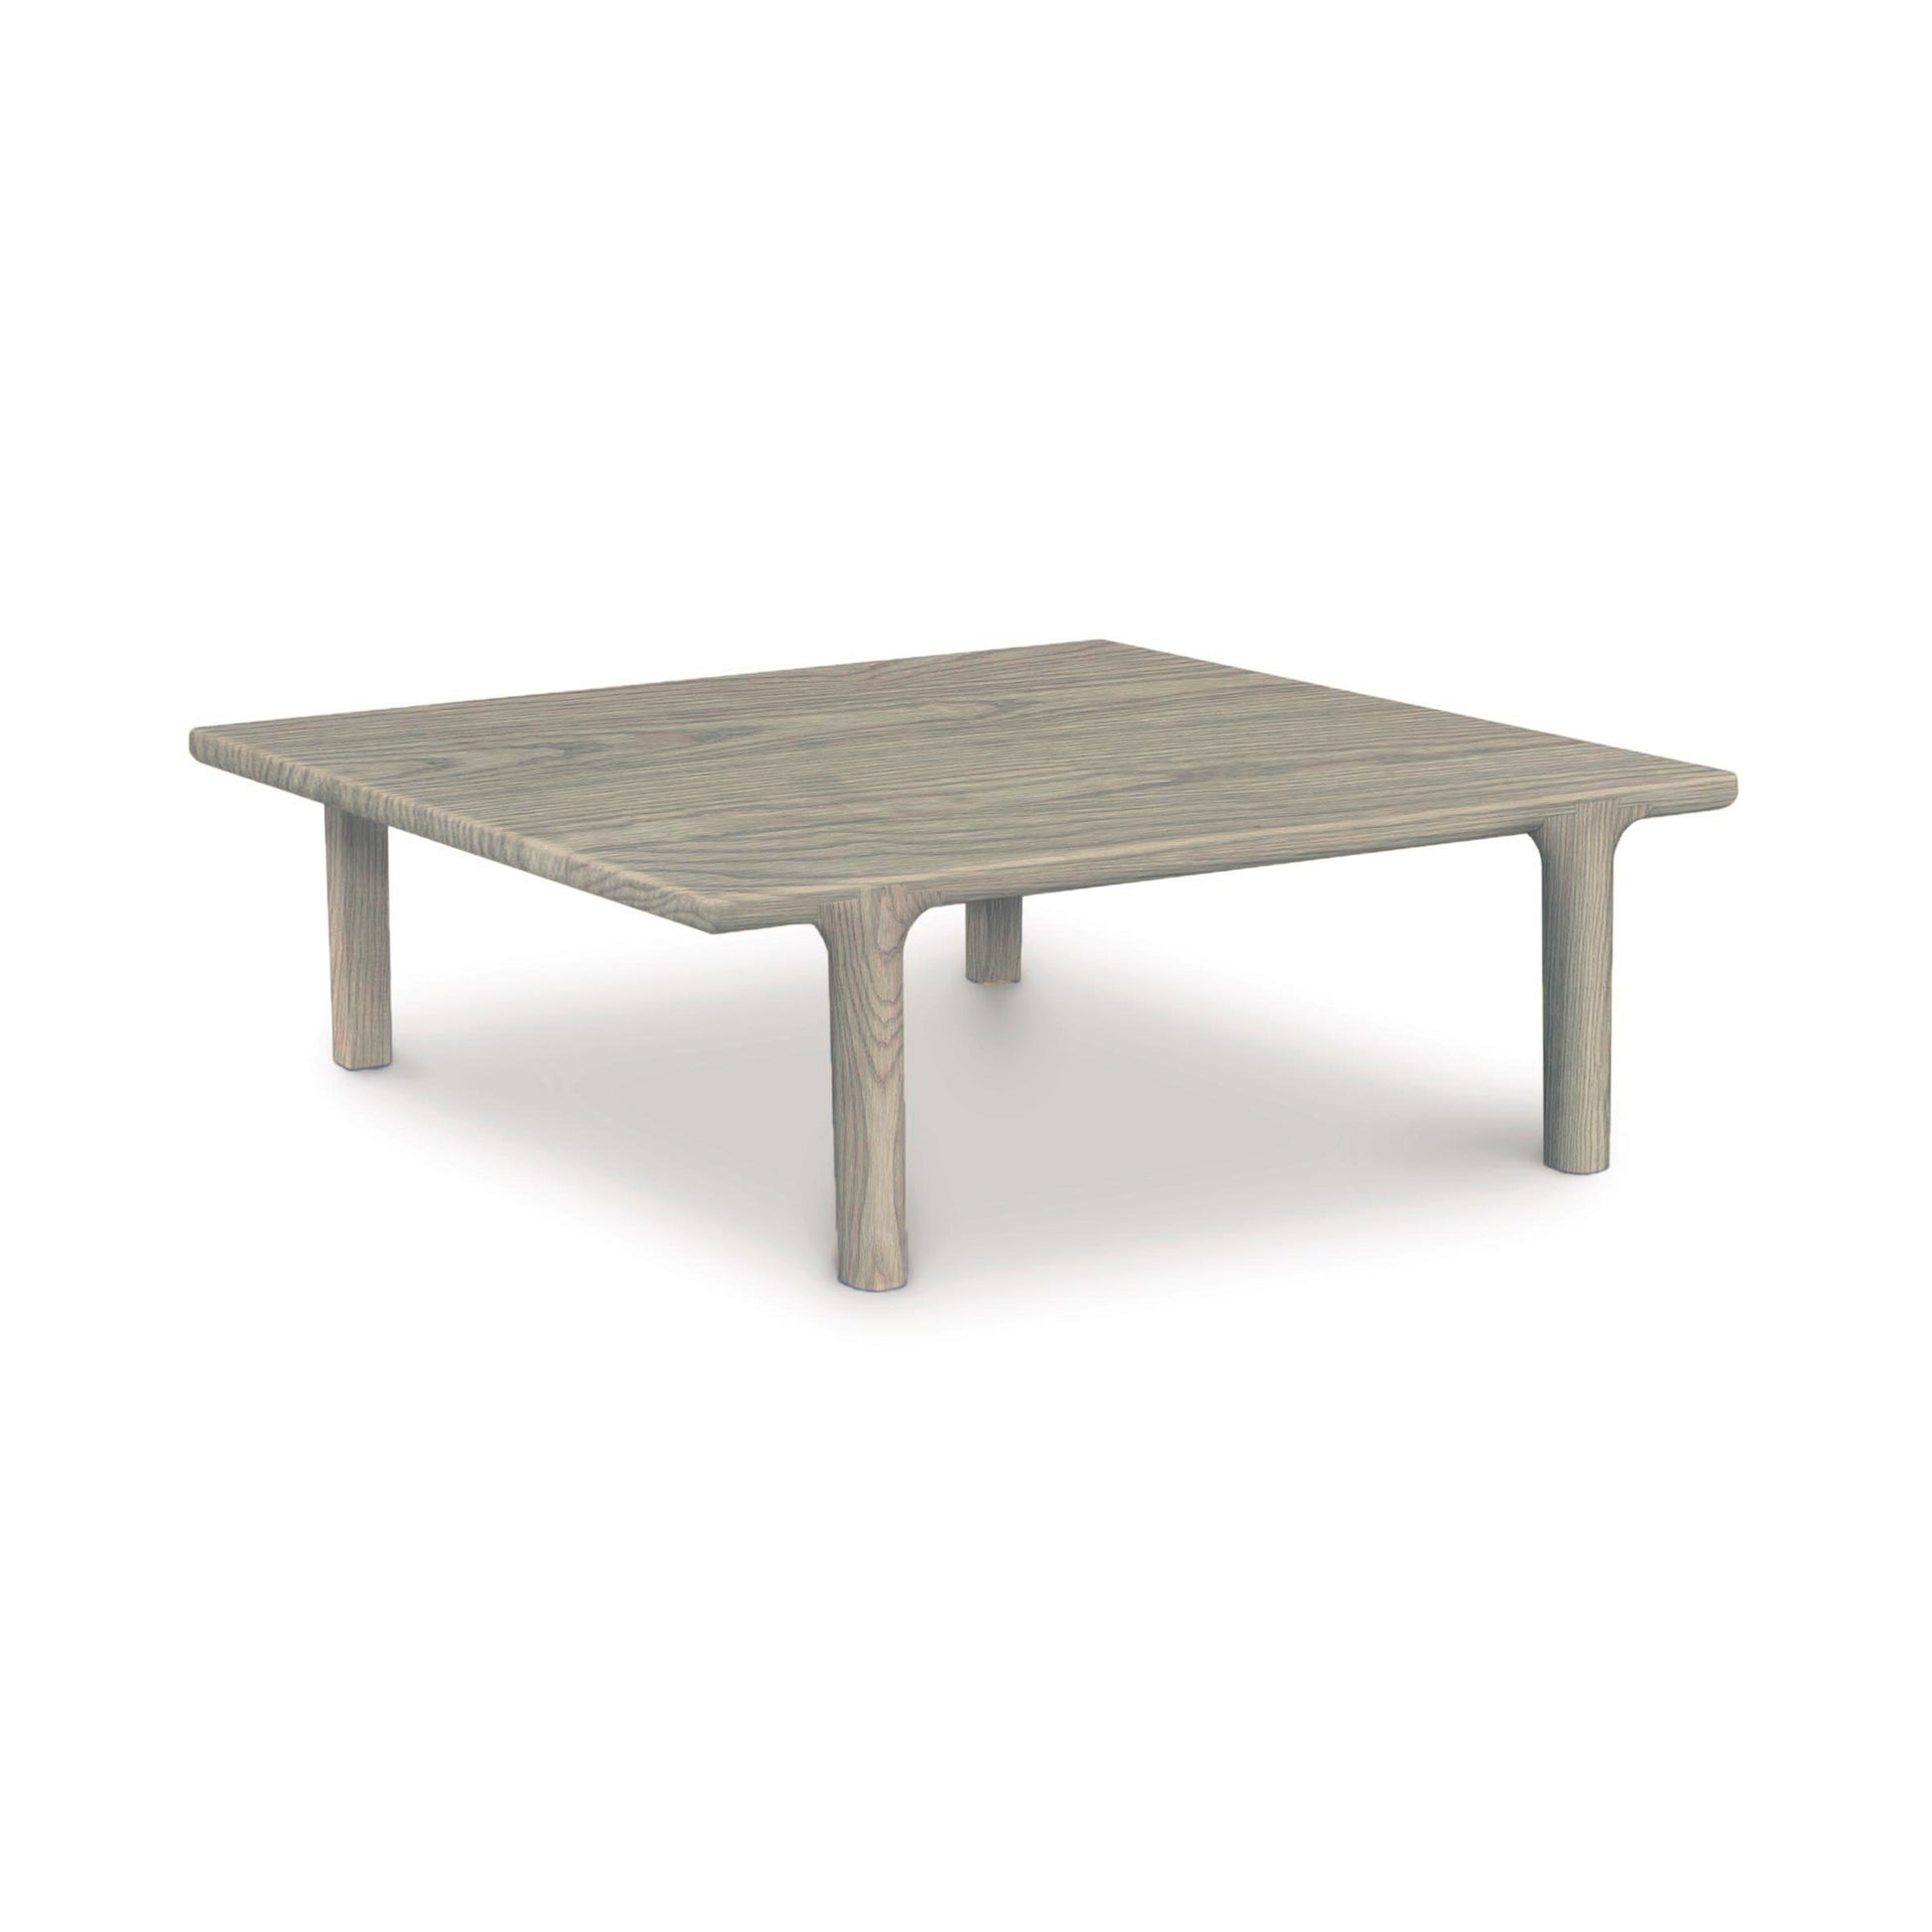 A Sierra Square Coffee Table from Copeland Furniture, featuring a contemporary design, isolated on a white background.